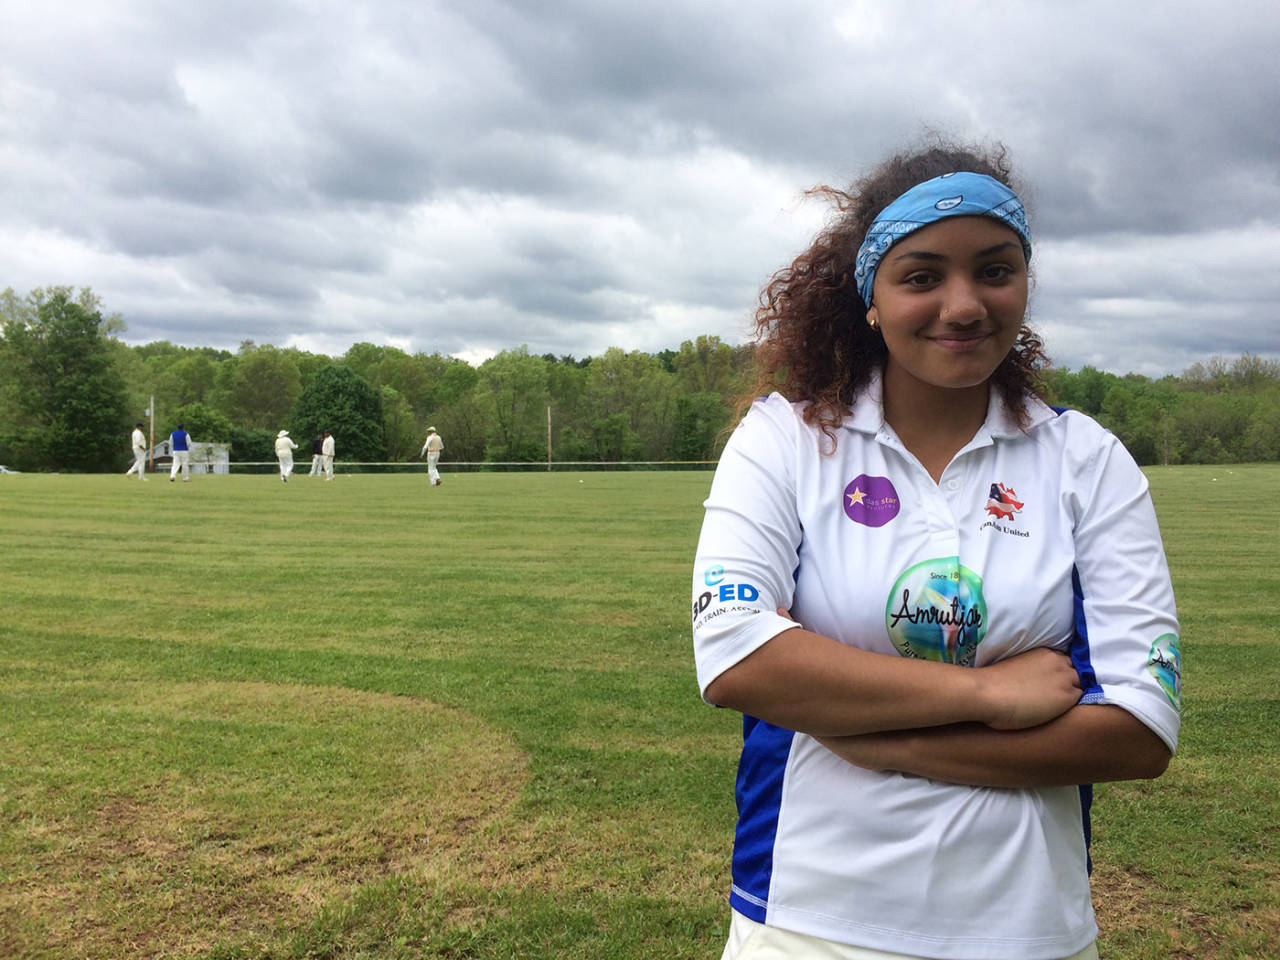 Globetrotter Jade Rodriguez has lived in six countries, and travelled to Peru, Brazil, Argentina, the USA and the UK to participate in tournaments for the Peruvian national team and the CanAm United Women's Cricket Association&nbsp;&nbsp;&bull;&nbsp;&nbsp;Aishwarya Kumar/ESPN